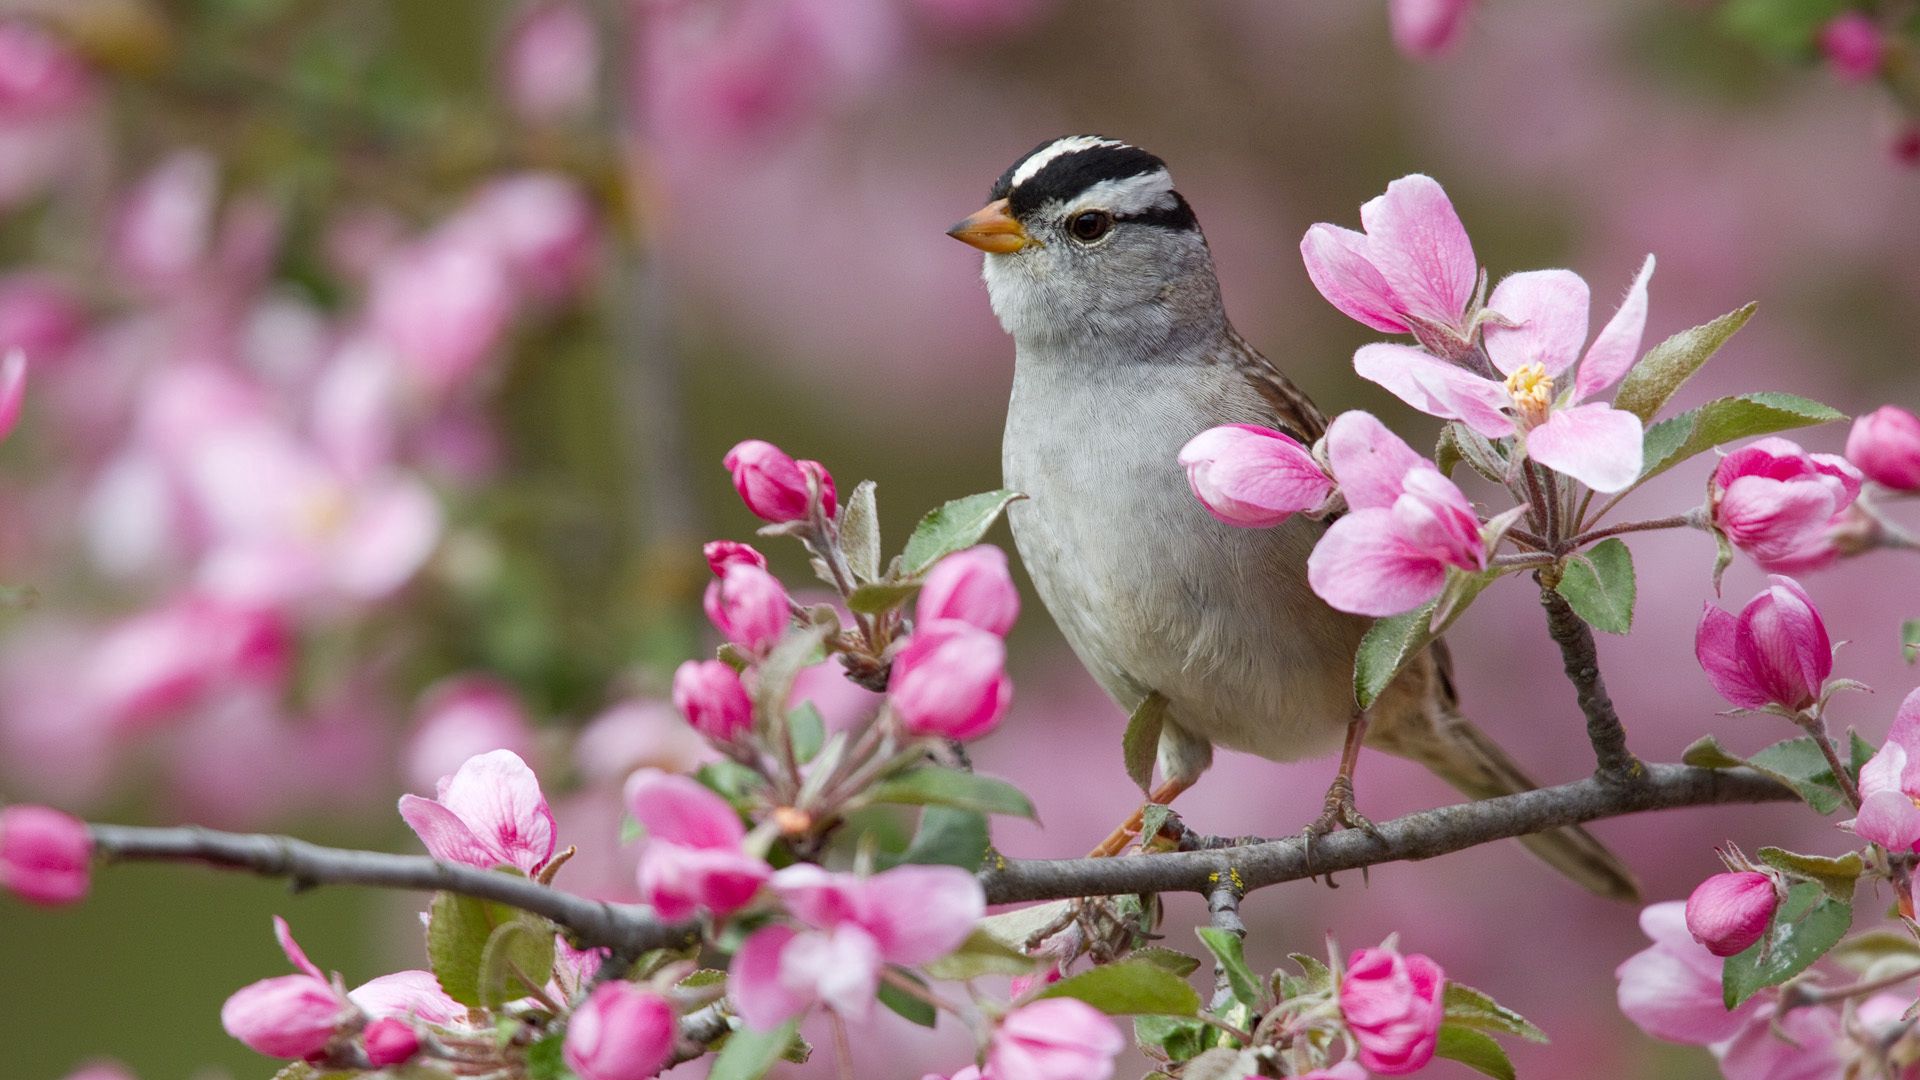 59081 download wallpaper bird, animals, flowers, sparrow, branches, bloom, flowering screensavers and pictures for free